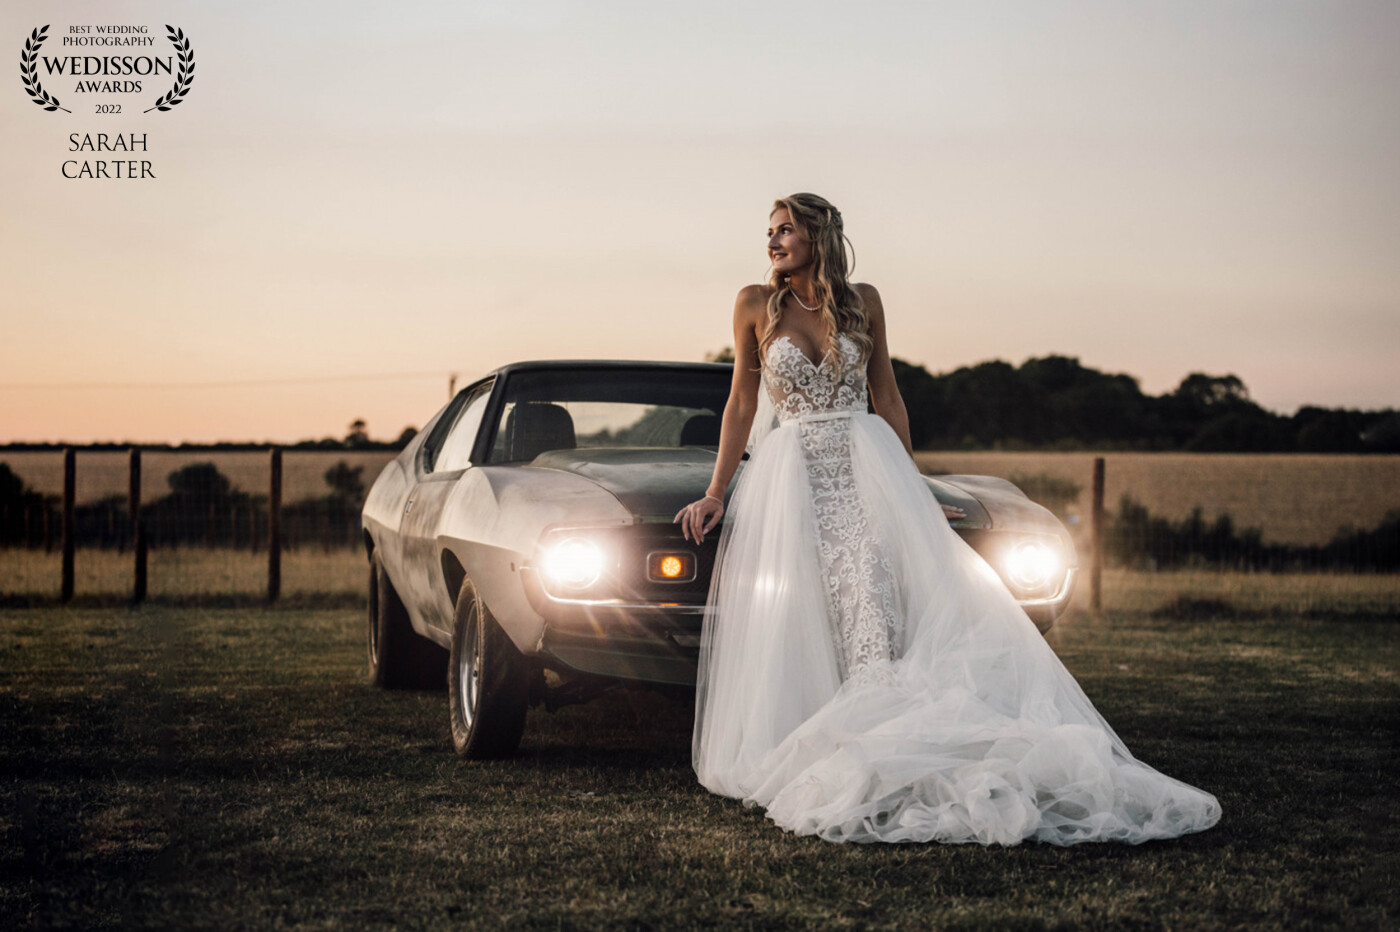 Took this just as the sun was going down. The wedding was in in a big field full of vintage cars. This beautiful bride is resting on her Husbands car. He has since told me he has this photo blown up in his garage. His two favourite things!